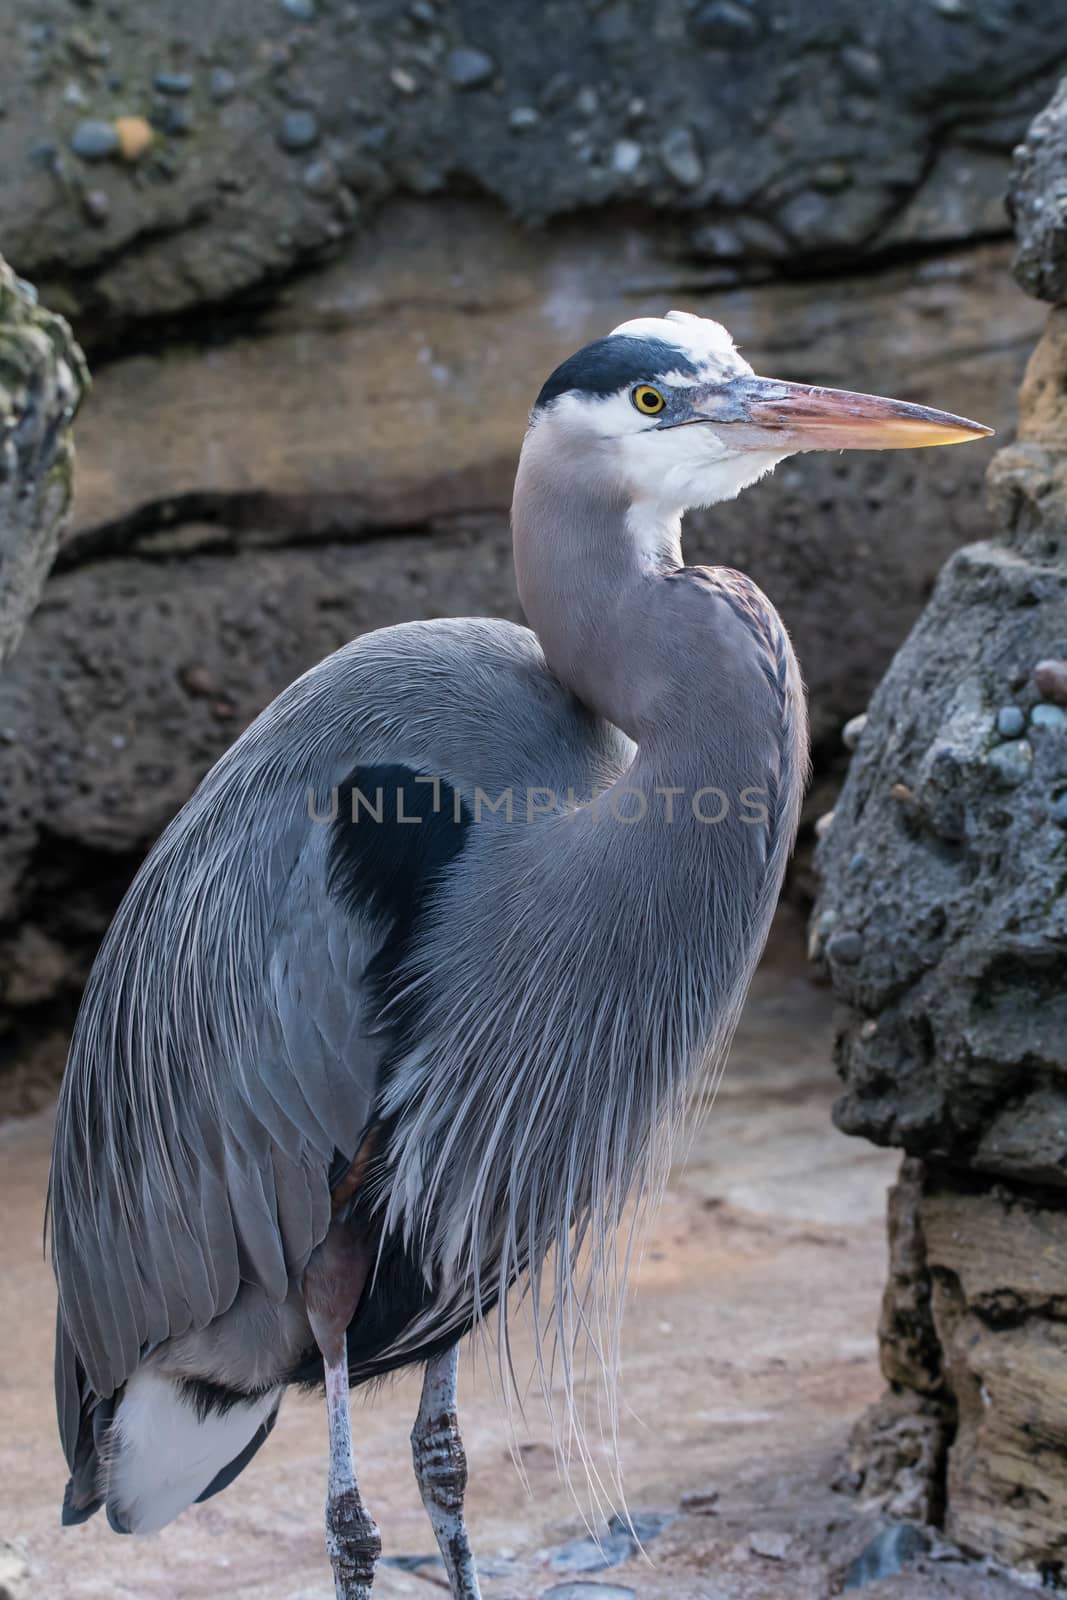 Close up of Heron on lightly overcast day with soft shadows.